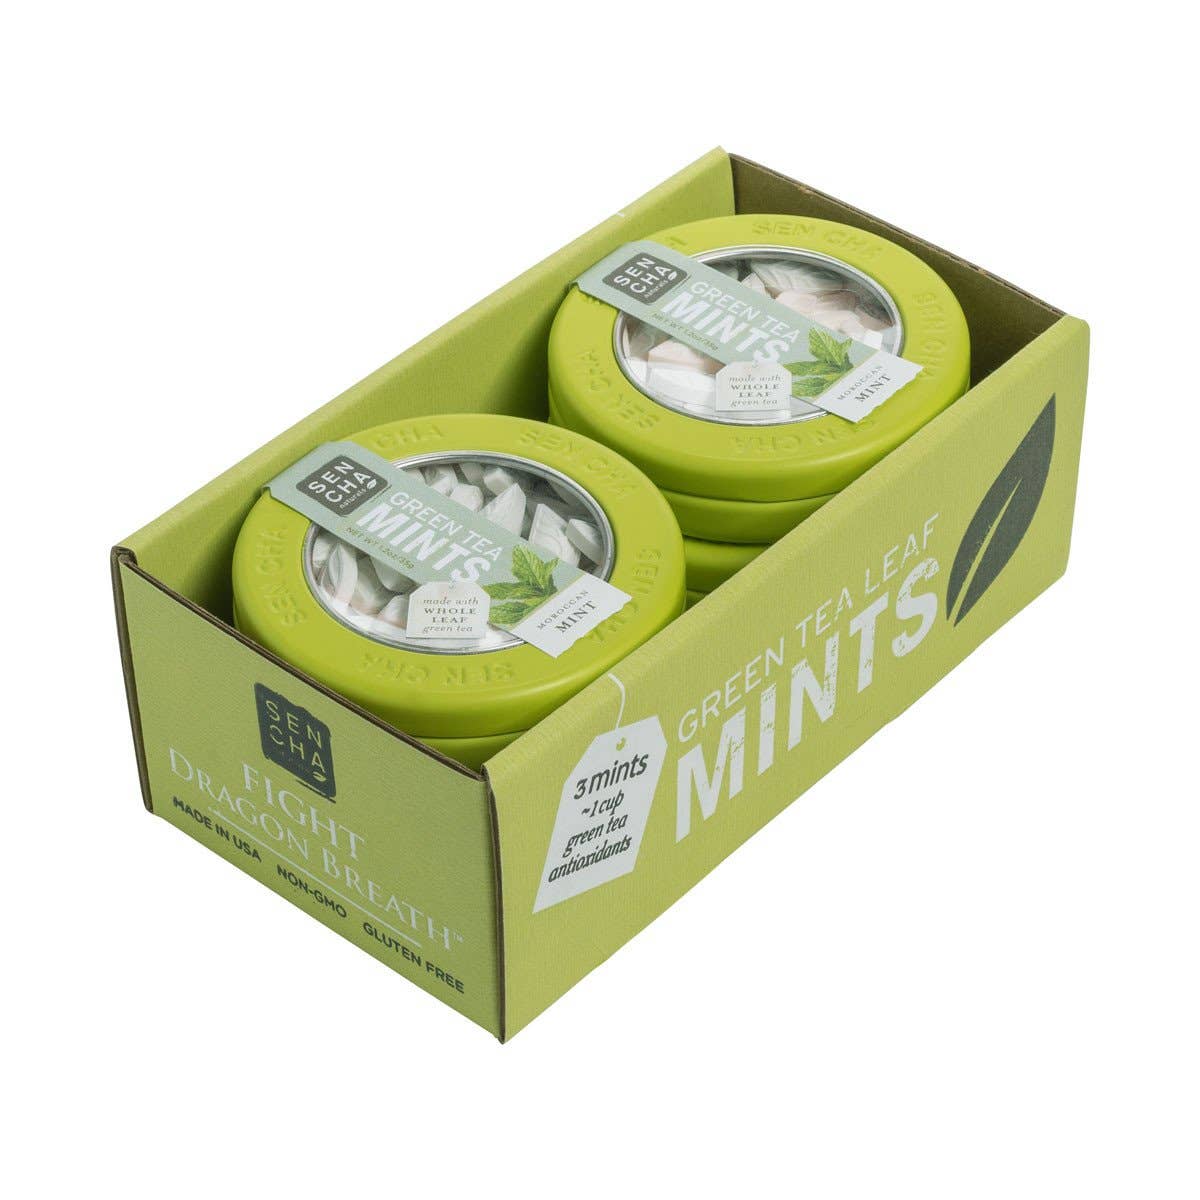 Green Tea Mints Canisters - Moroccan Mint Flavor